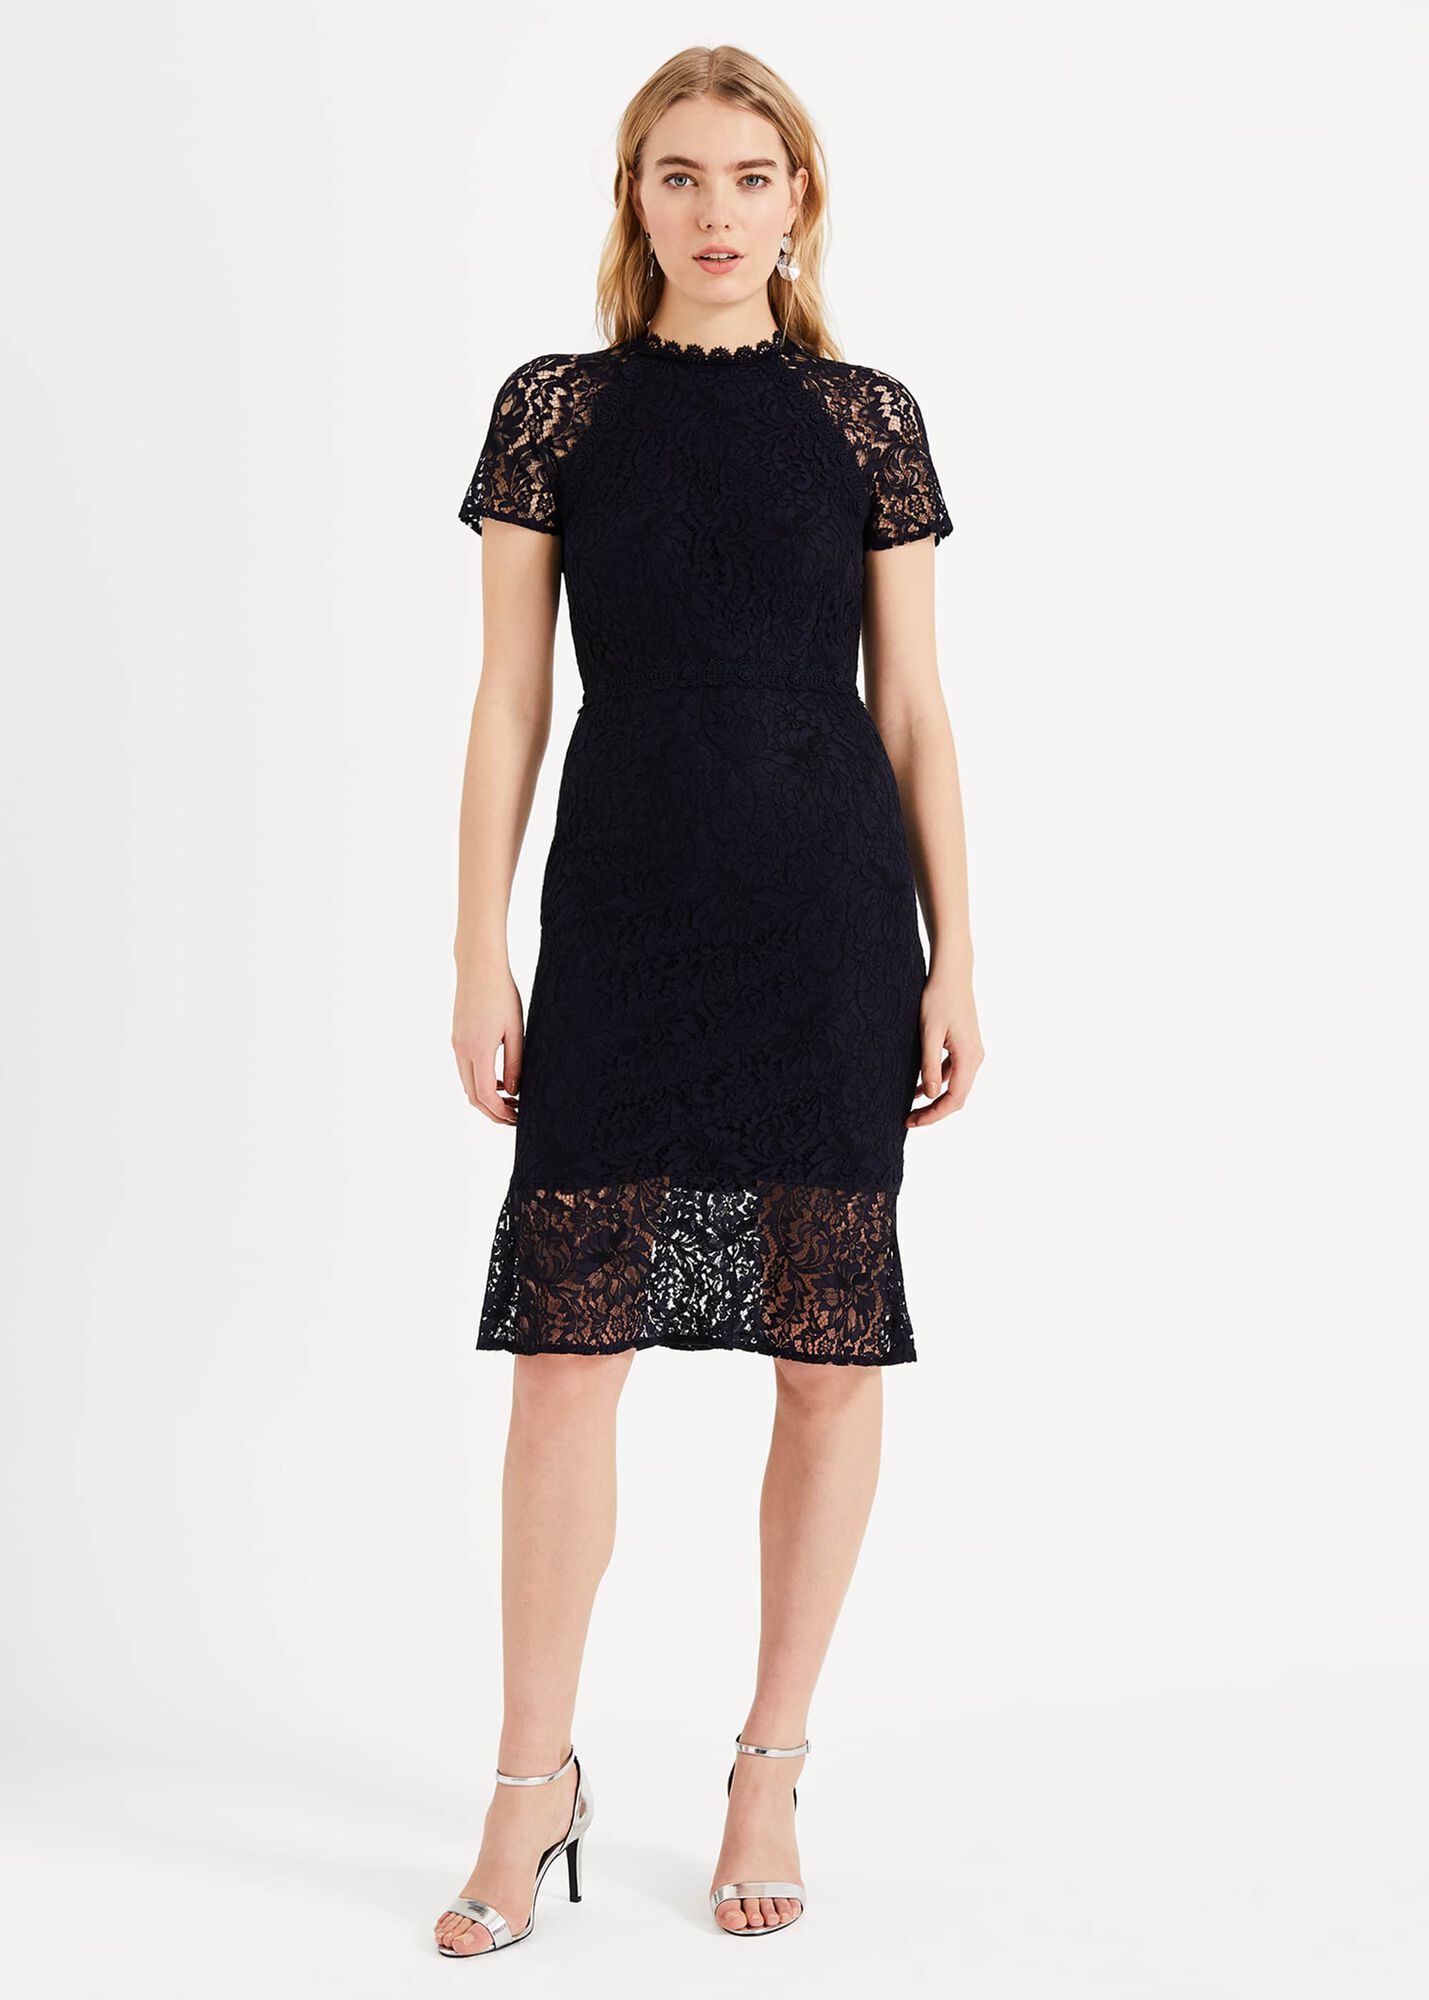 Mabel Lace Dress | Phase Eight